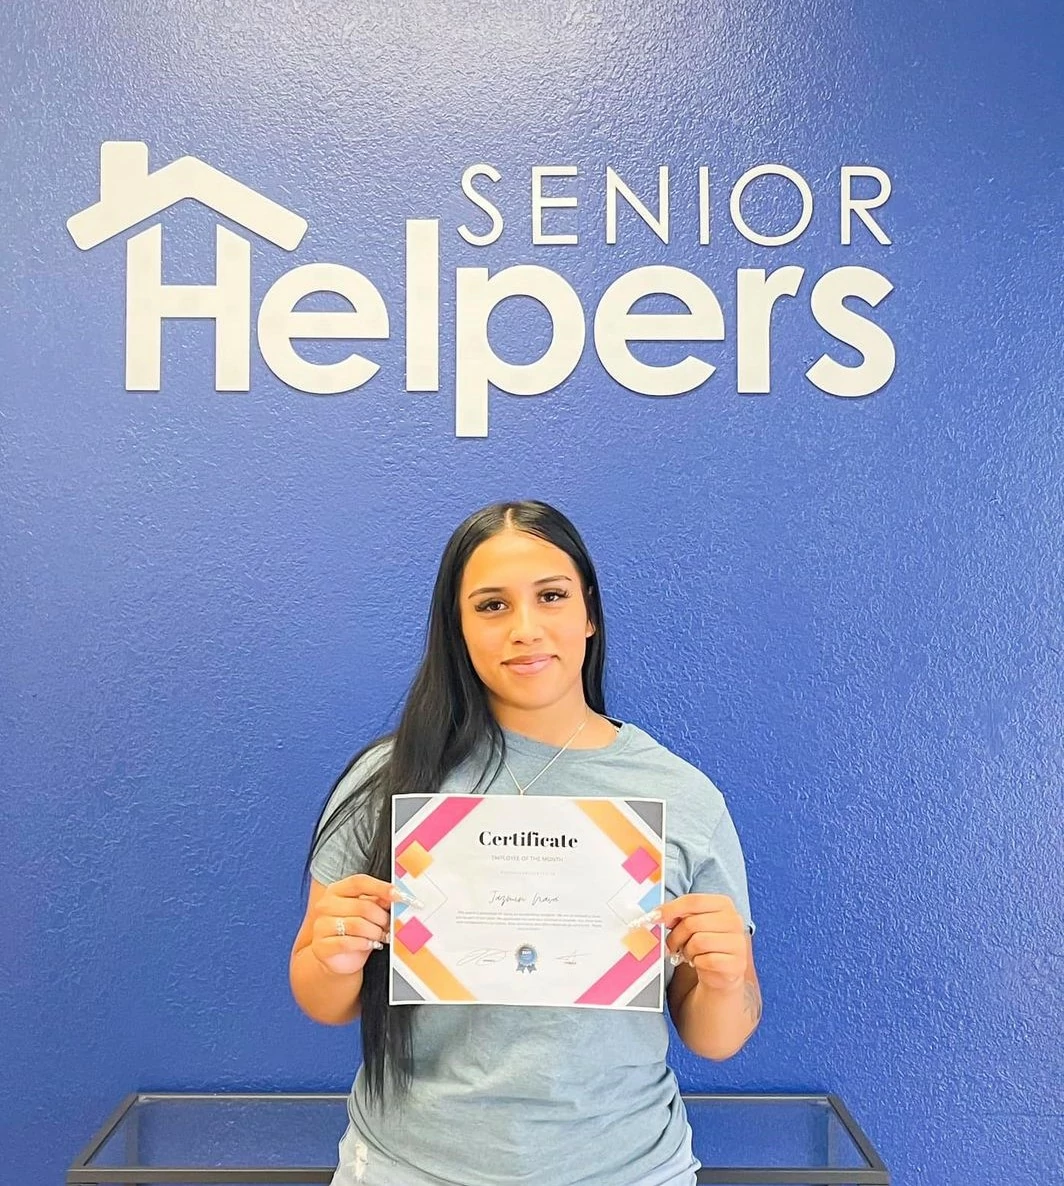 We would like to take this time to recognize Jazmin for her compassion and dedication to our families. Her flexibility and willingness to provide additional support when called upon are/is impacting our local families.  Thank you again for all the support and care you are providing to our local families. Thank you for serving our country in the Army Reserve.